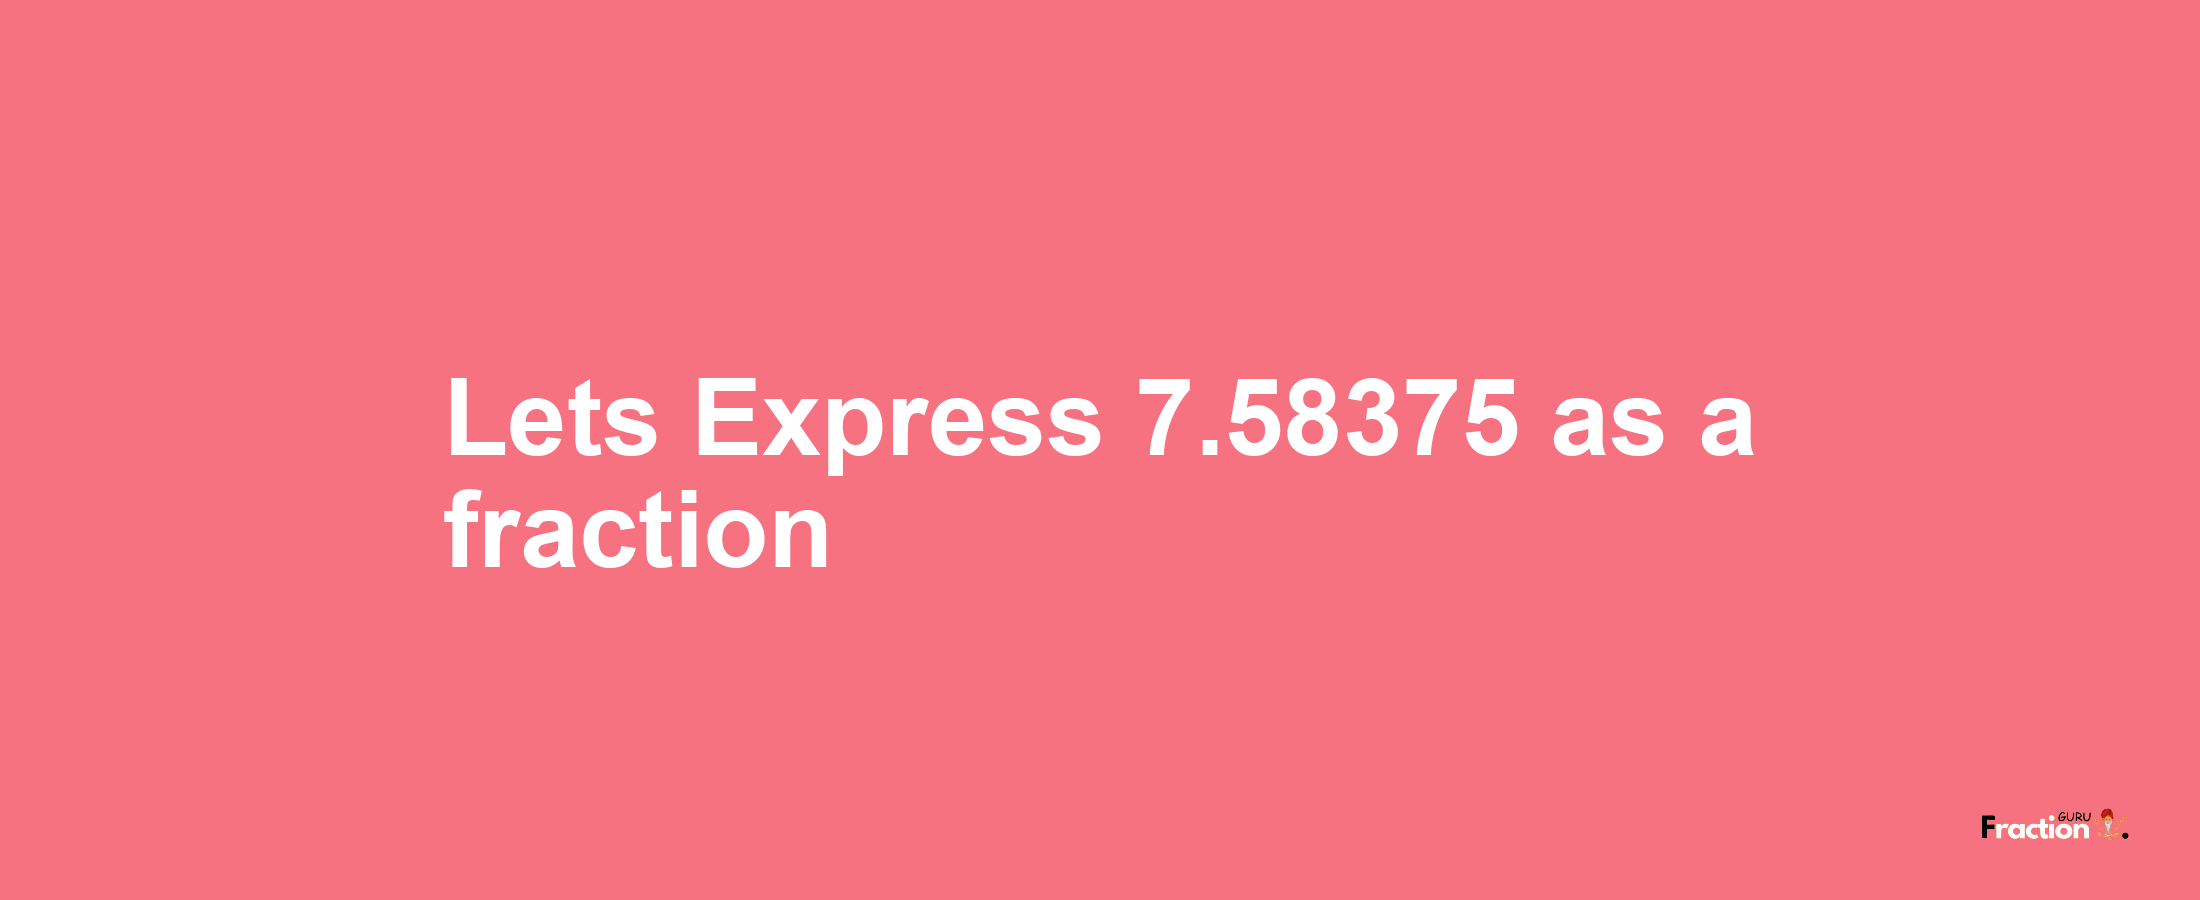 Lets Express 7.58375 as afraction